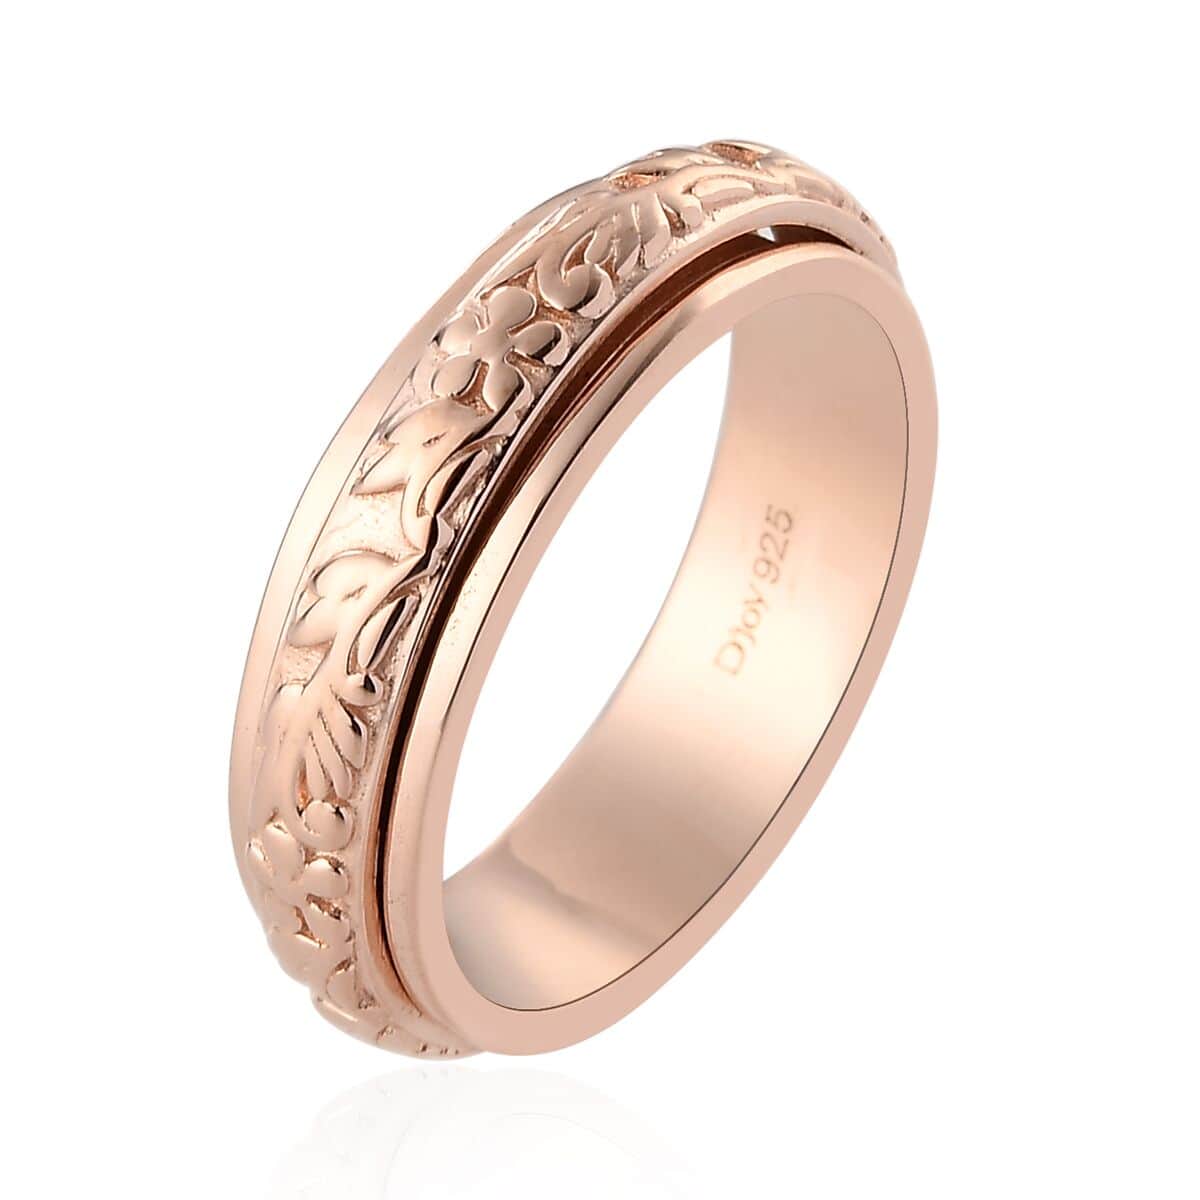 Floral Fidget Spinner Ring for Anxiety in Vermeil Rose Gold Over Sterling Silver, Anxiety Ring for Women, Fidget Rings for Anxiety, Promise Rings 4.50 Grams (Size 5.00) image number 3